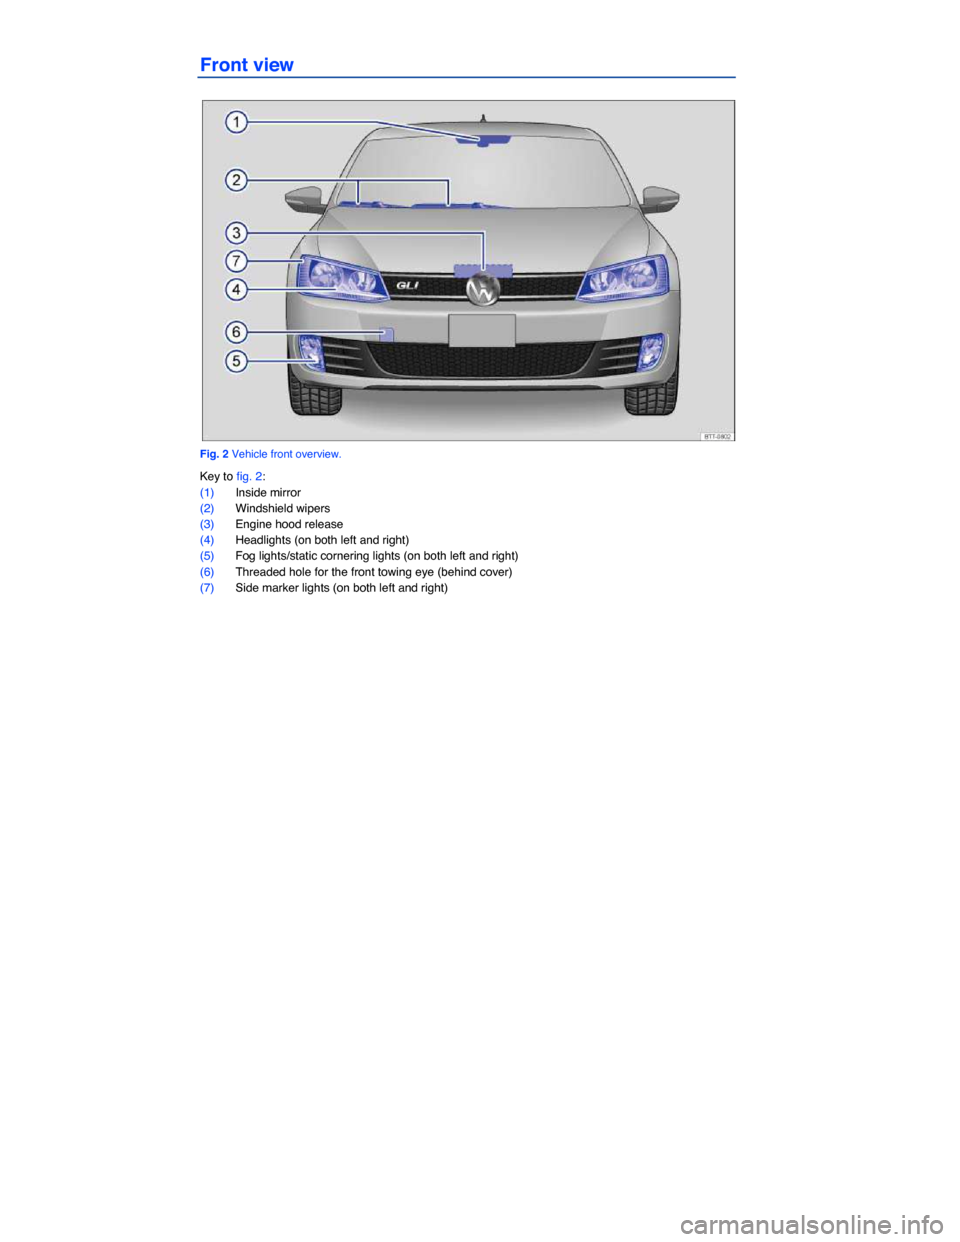 VOLKSWAGEN JETTA GLI 2014 1B / 6.G Owners Manual  
Front view 
 
Fig. 2 Vehicle front overview. 
Key to fig. 2: 
(1) Inside mirror  
(2) Windshield wipers  
(3) Engine hood release  
(4) Headlights (on both left and right)  
(5) Fog lights/static co